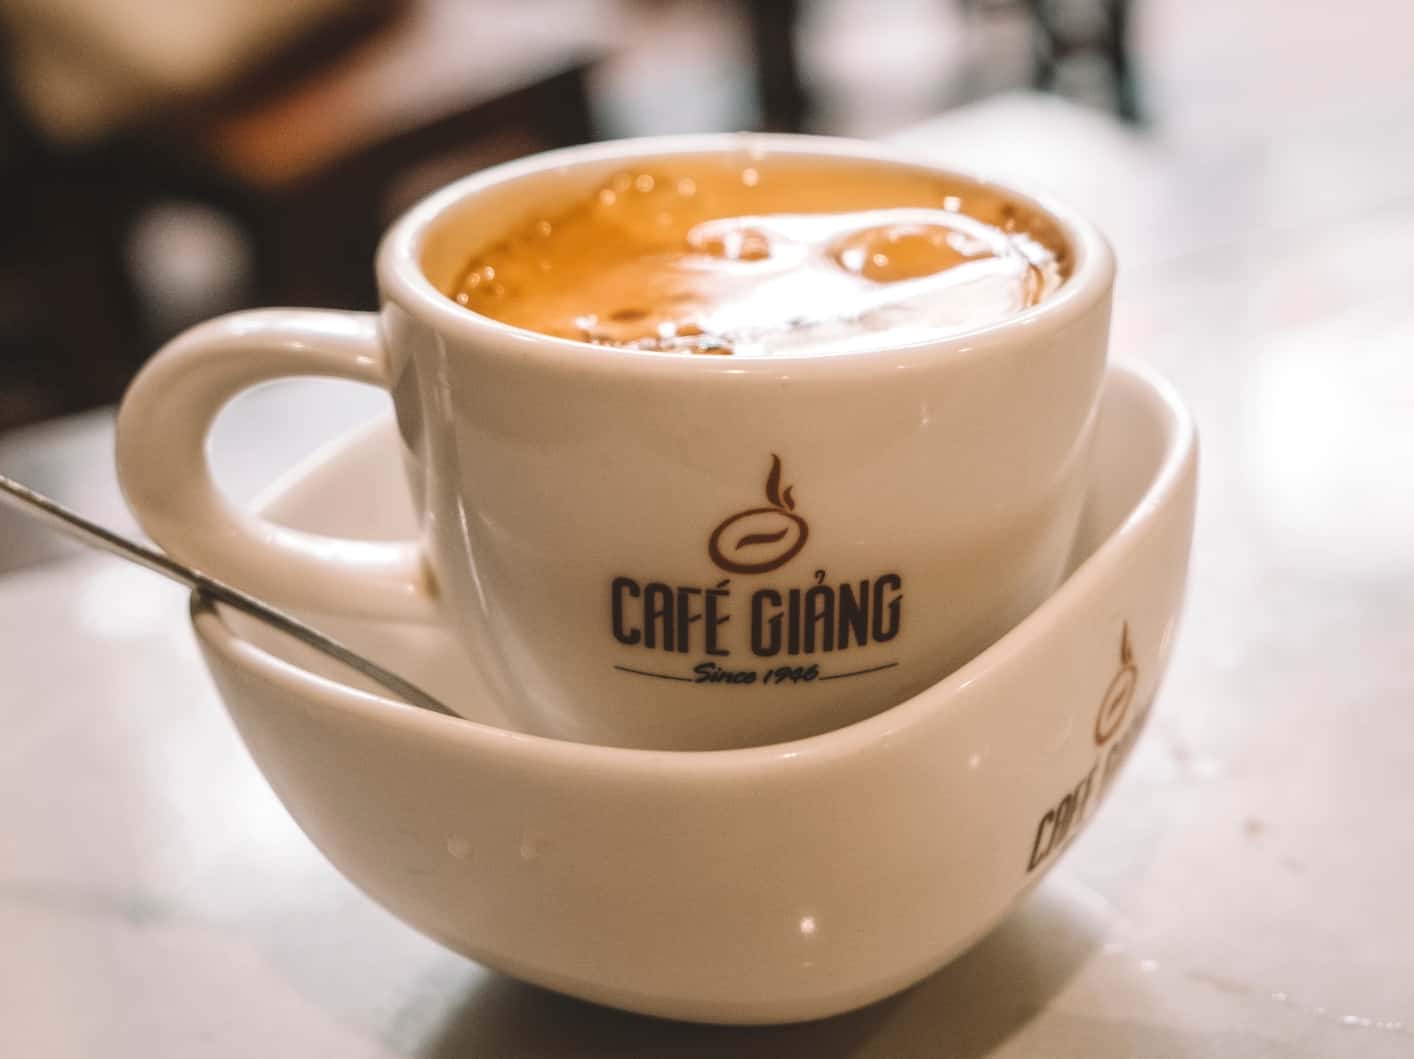 The oldest egg coffee cafe in Hanoi – Cafe Giang 